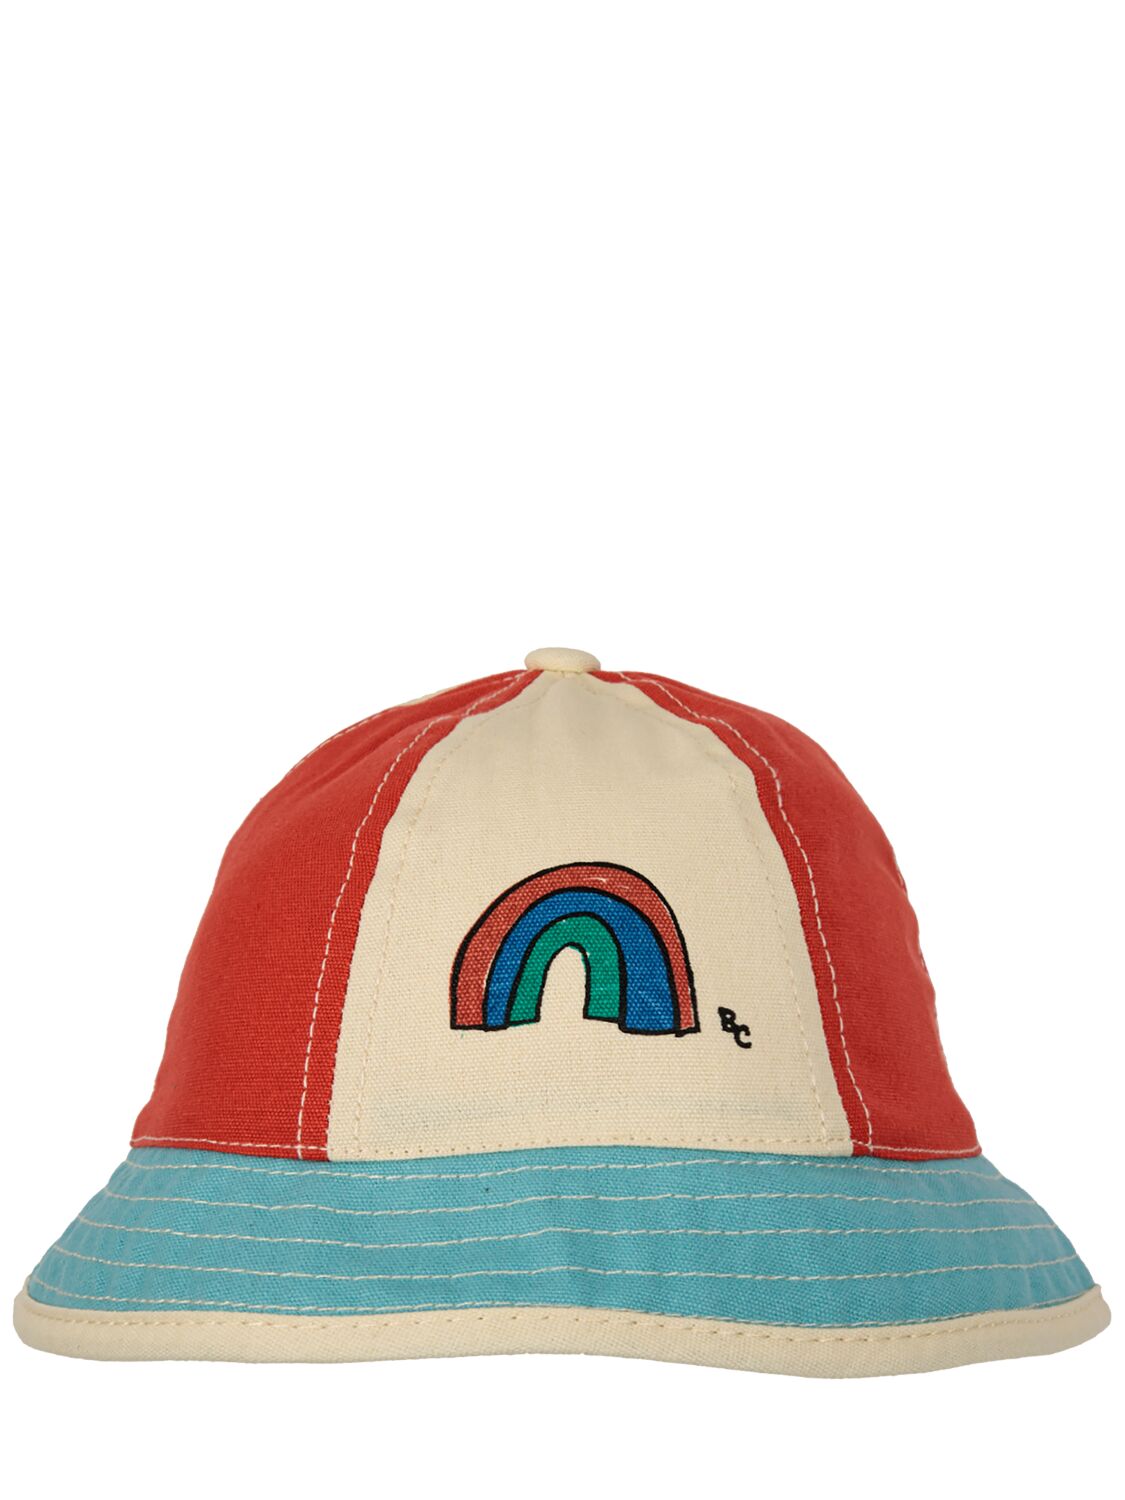 Image of Printed Cotton Bucket Hat